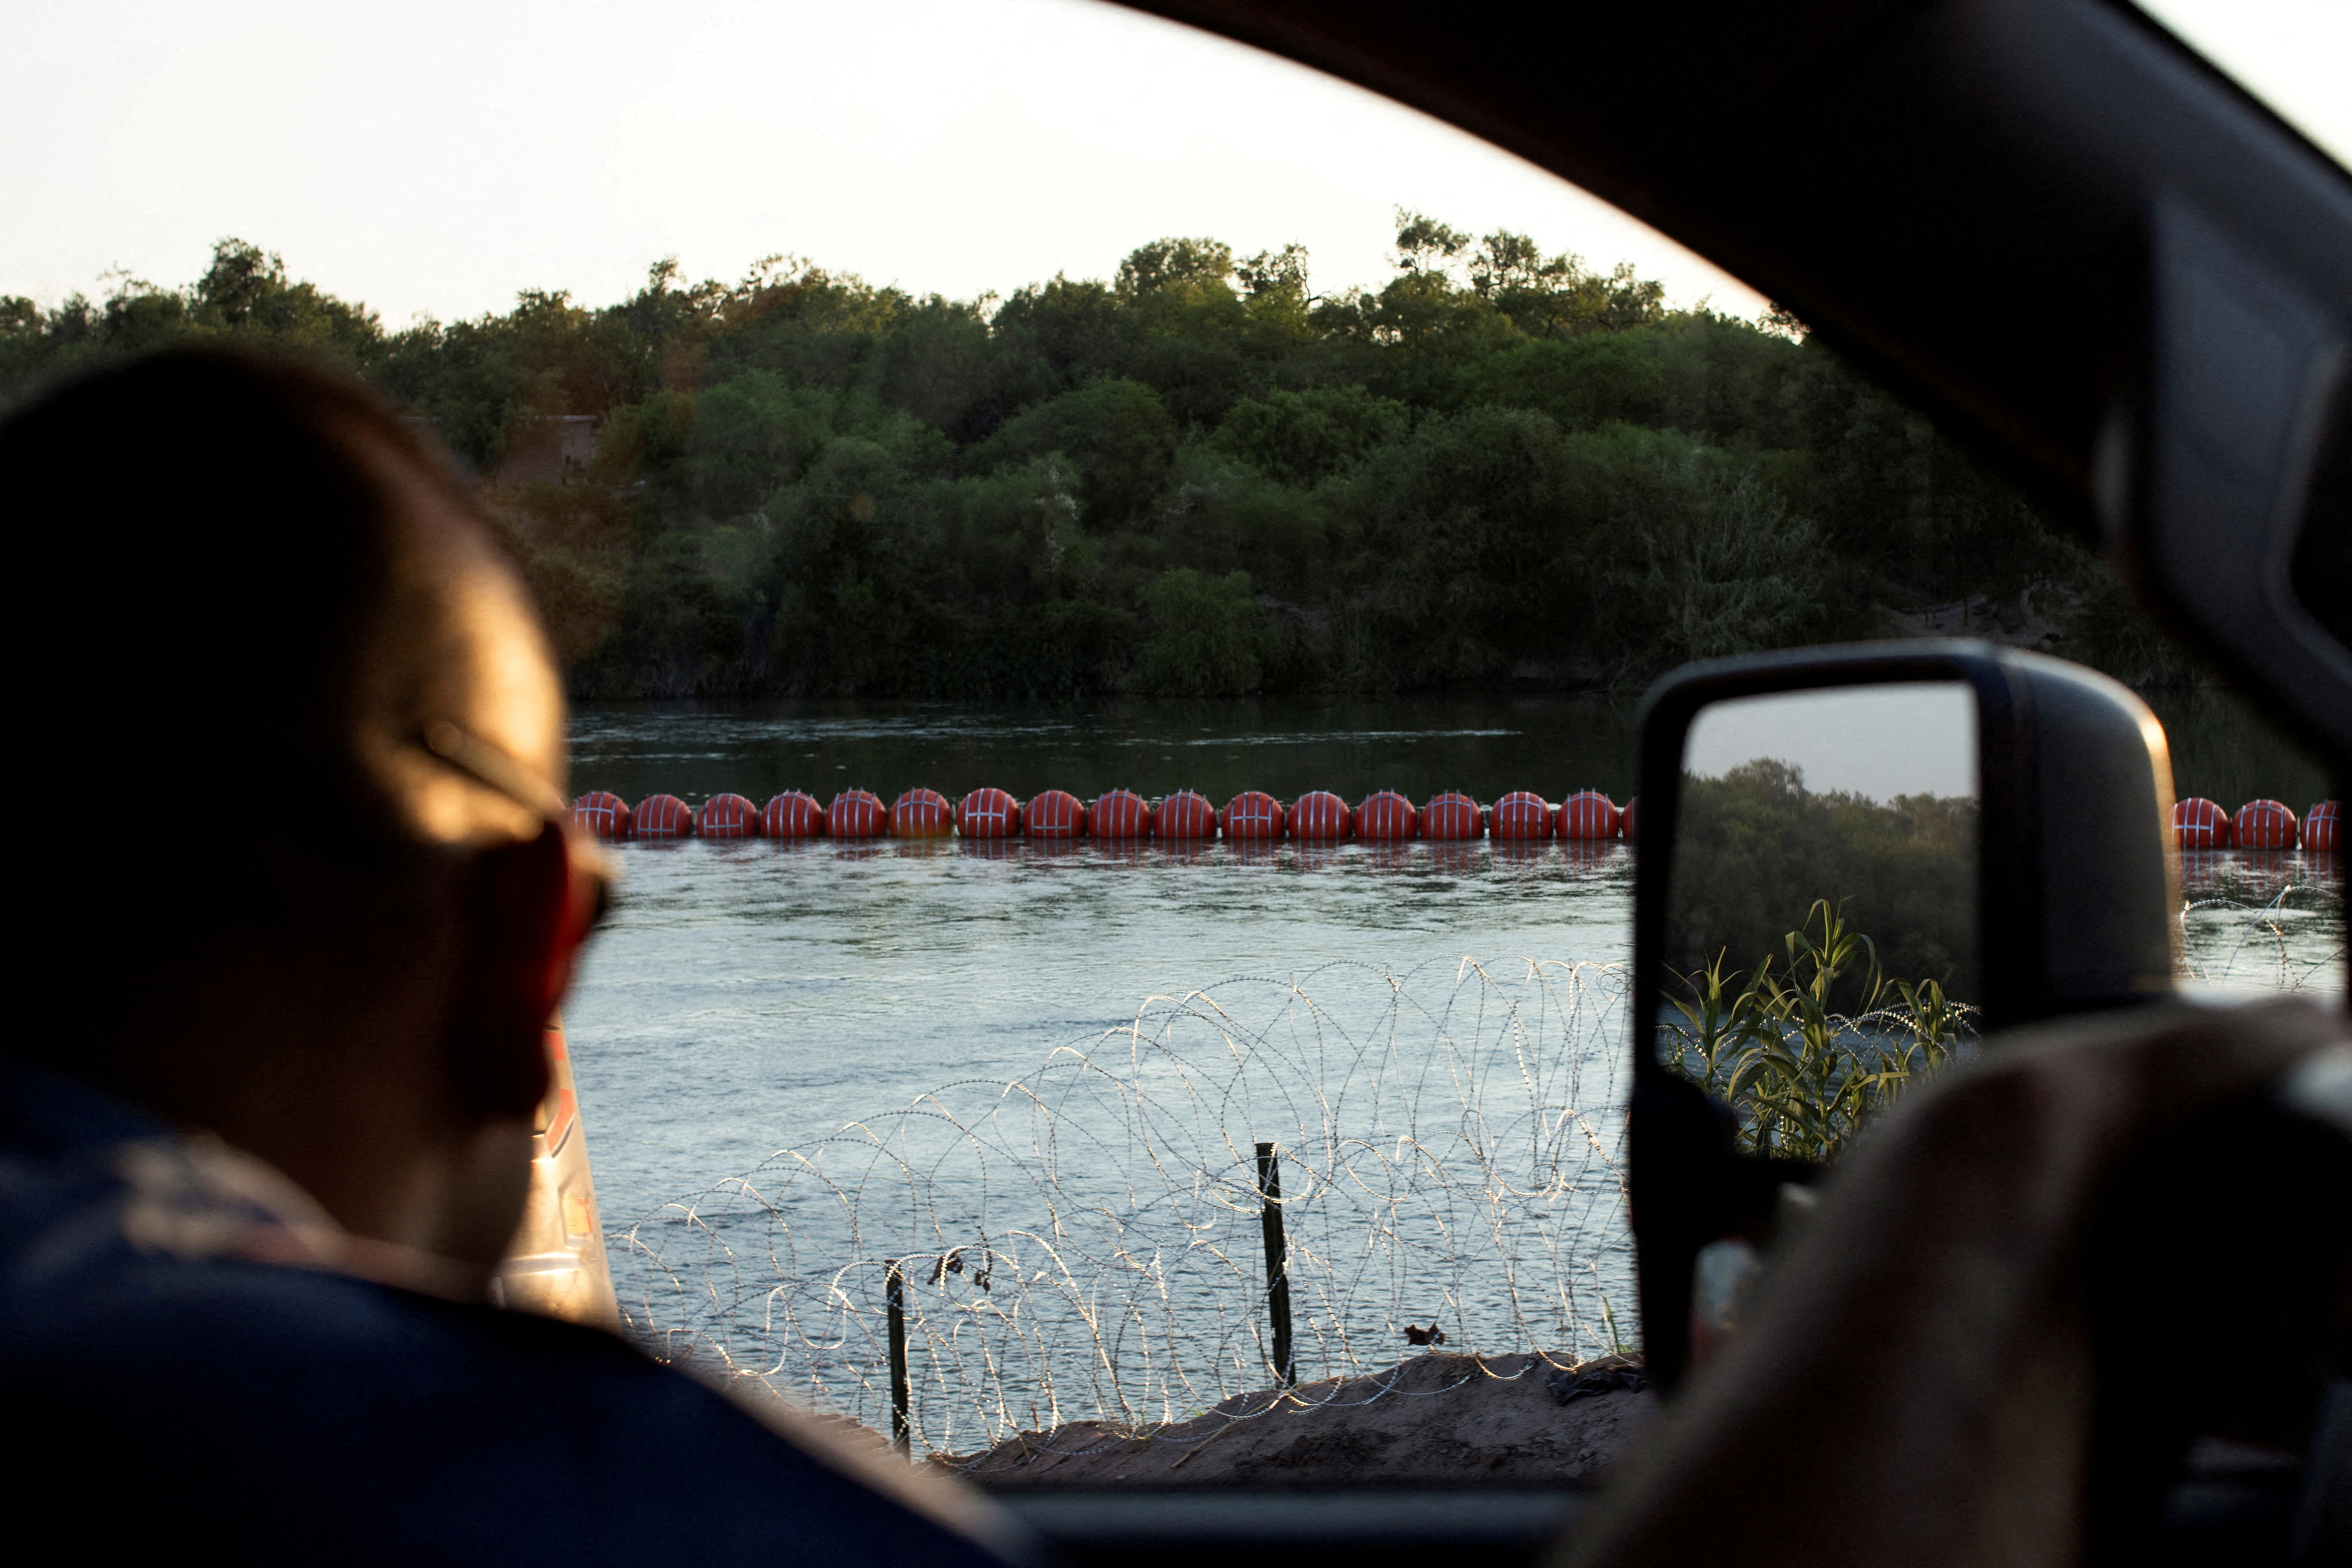 Station One Company C, Captain Luis Gonzalez, looks out at an unfinished orange buoy barrier placed in the Rio Grande River in response to migrants crossing the river, near Eagle Pass,